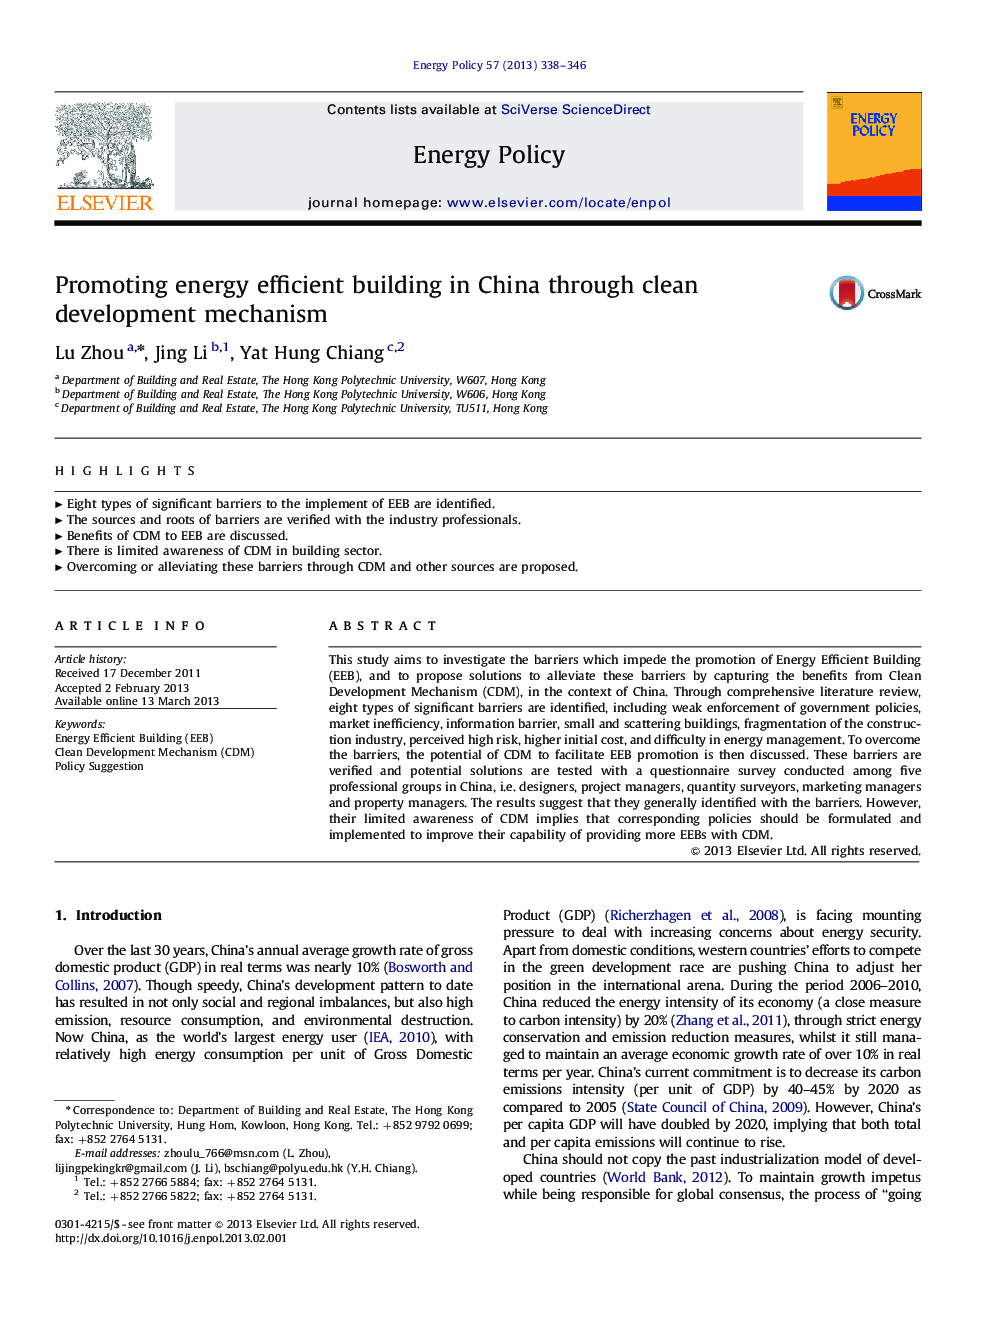 Promoting energy efficient building in China through clean development mechanism